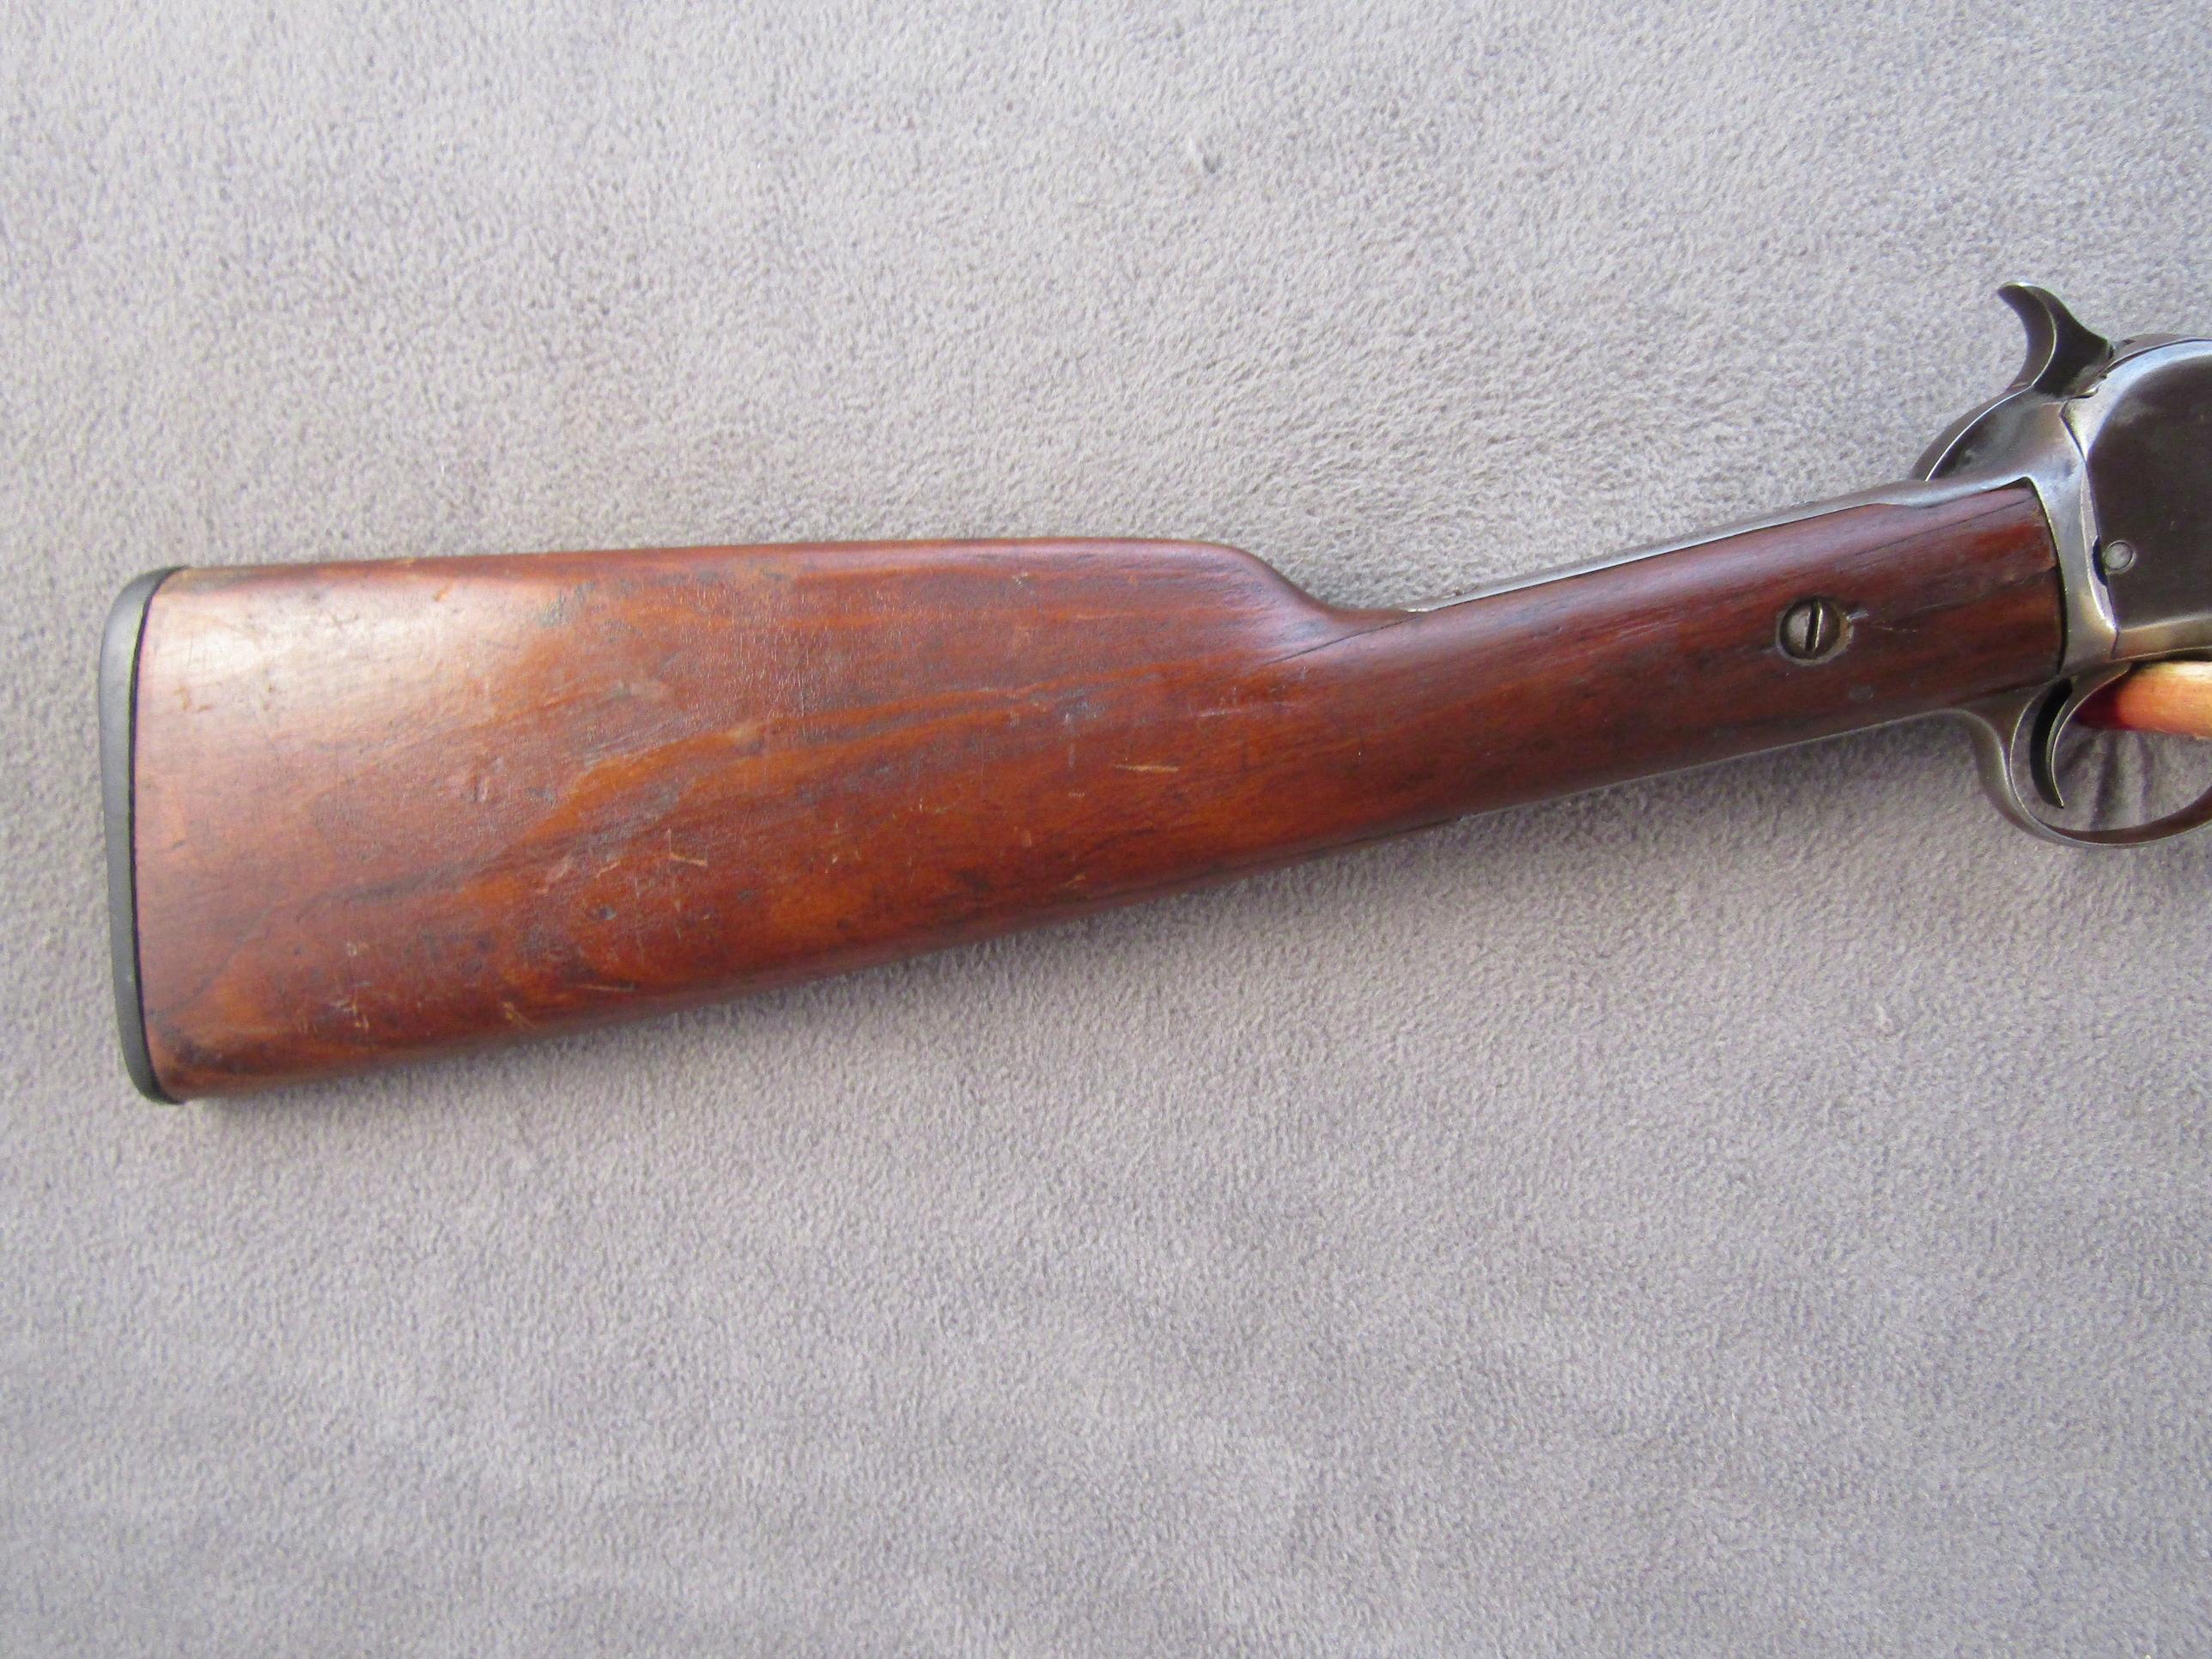 WINCHESTER Model 06, Pump-Action Rifle, .22, S#471267